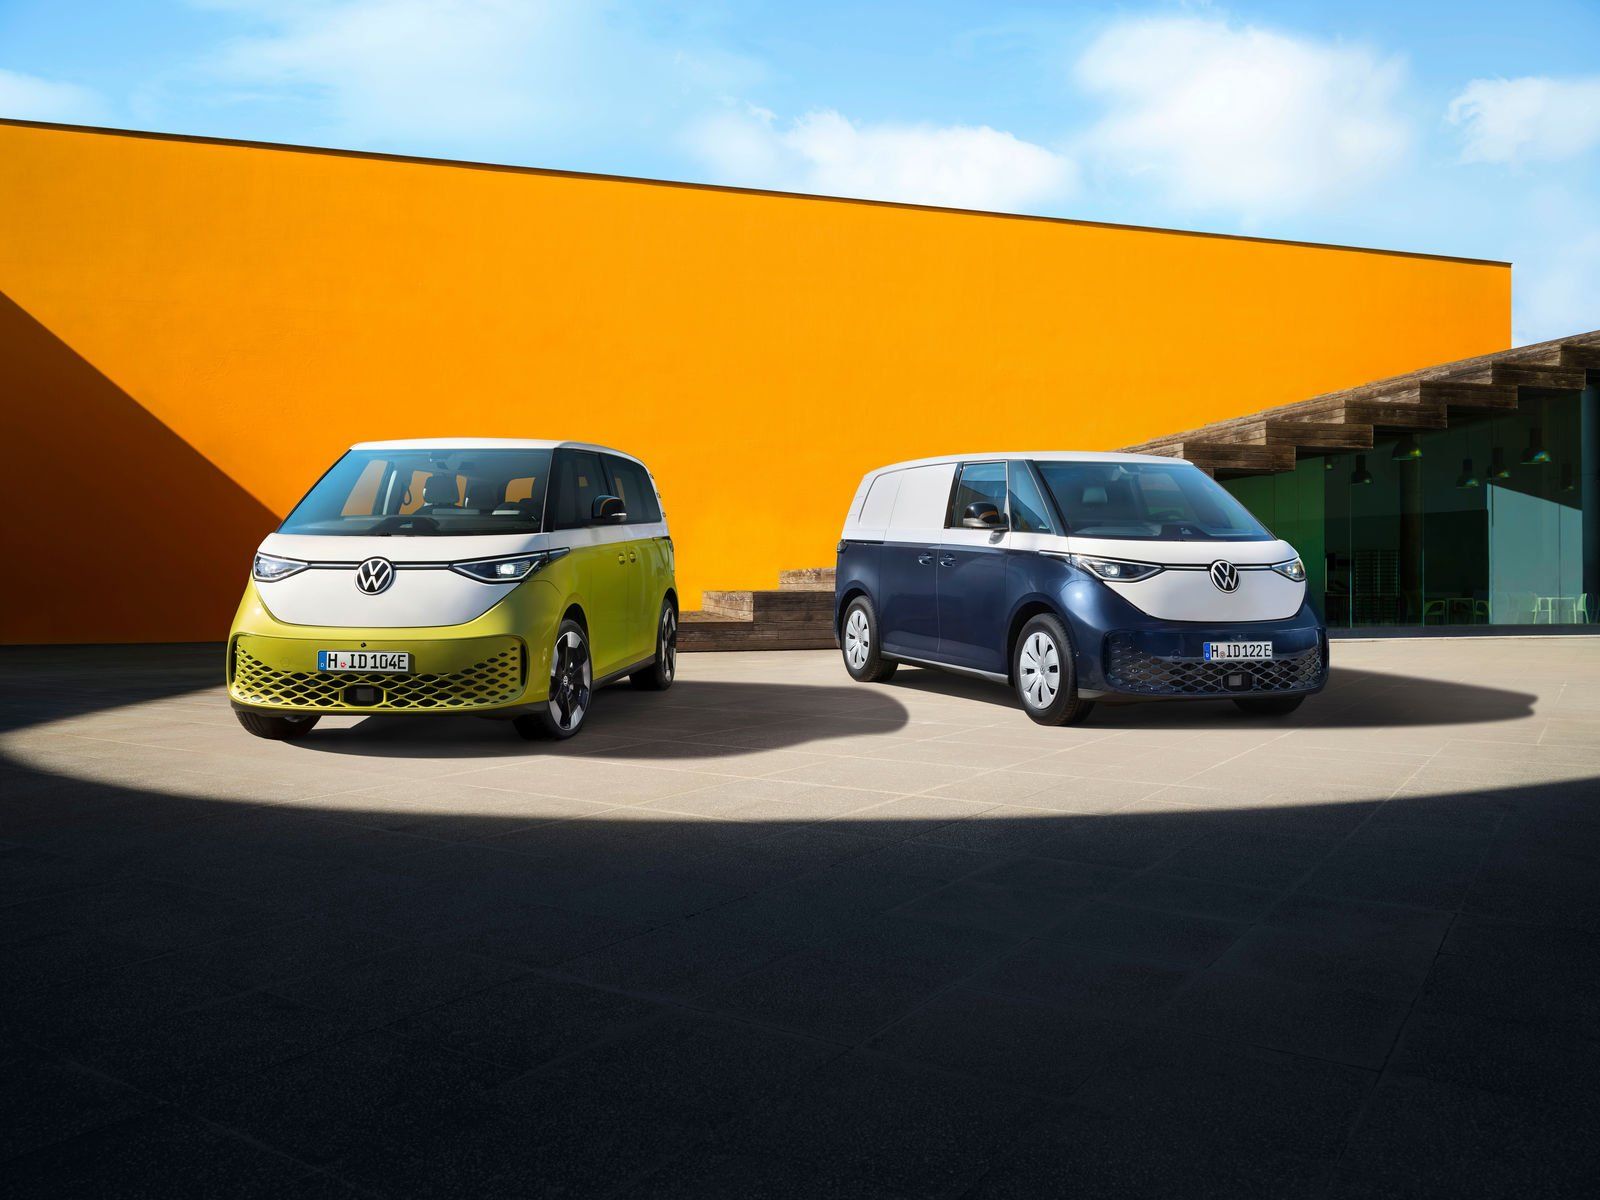 Volkwagens-Fully-Electric-Multi-Purpose-Vehicle-Blue-and-yellow-Car-Charger-UK-news-